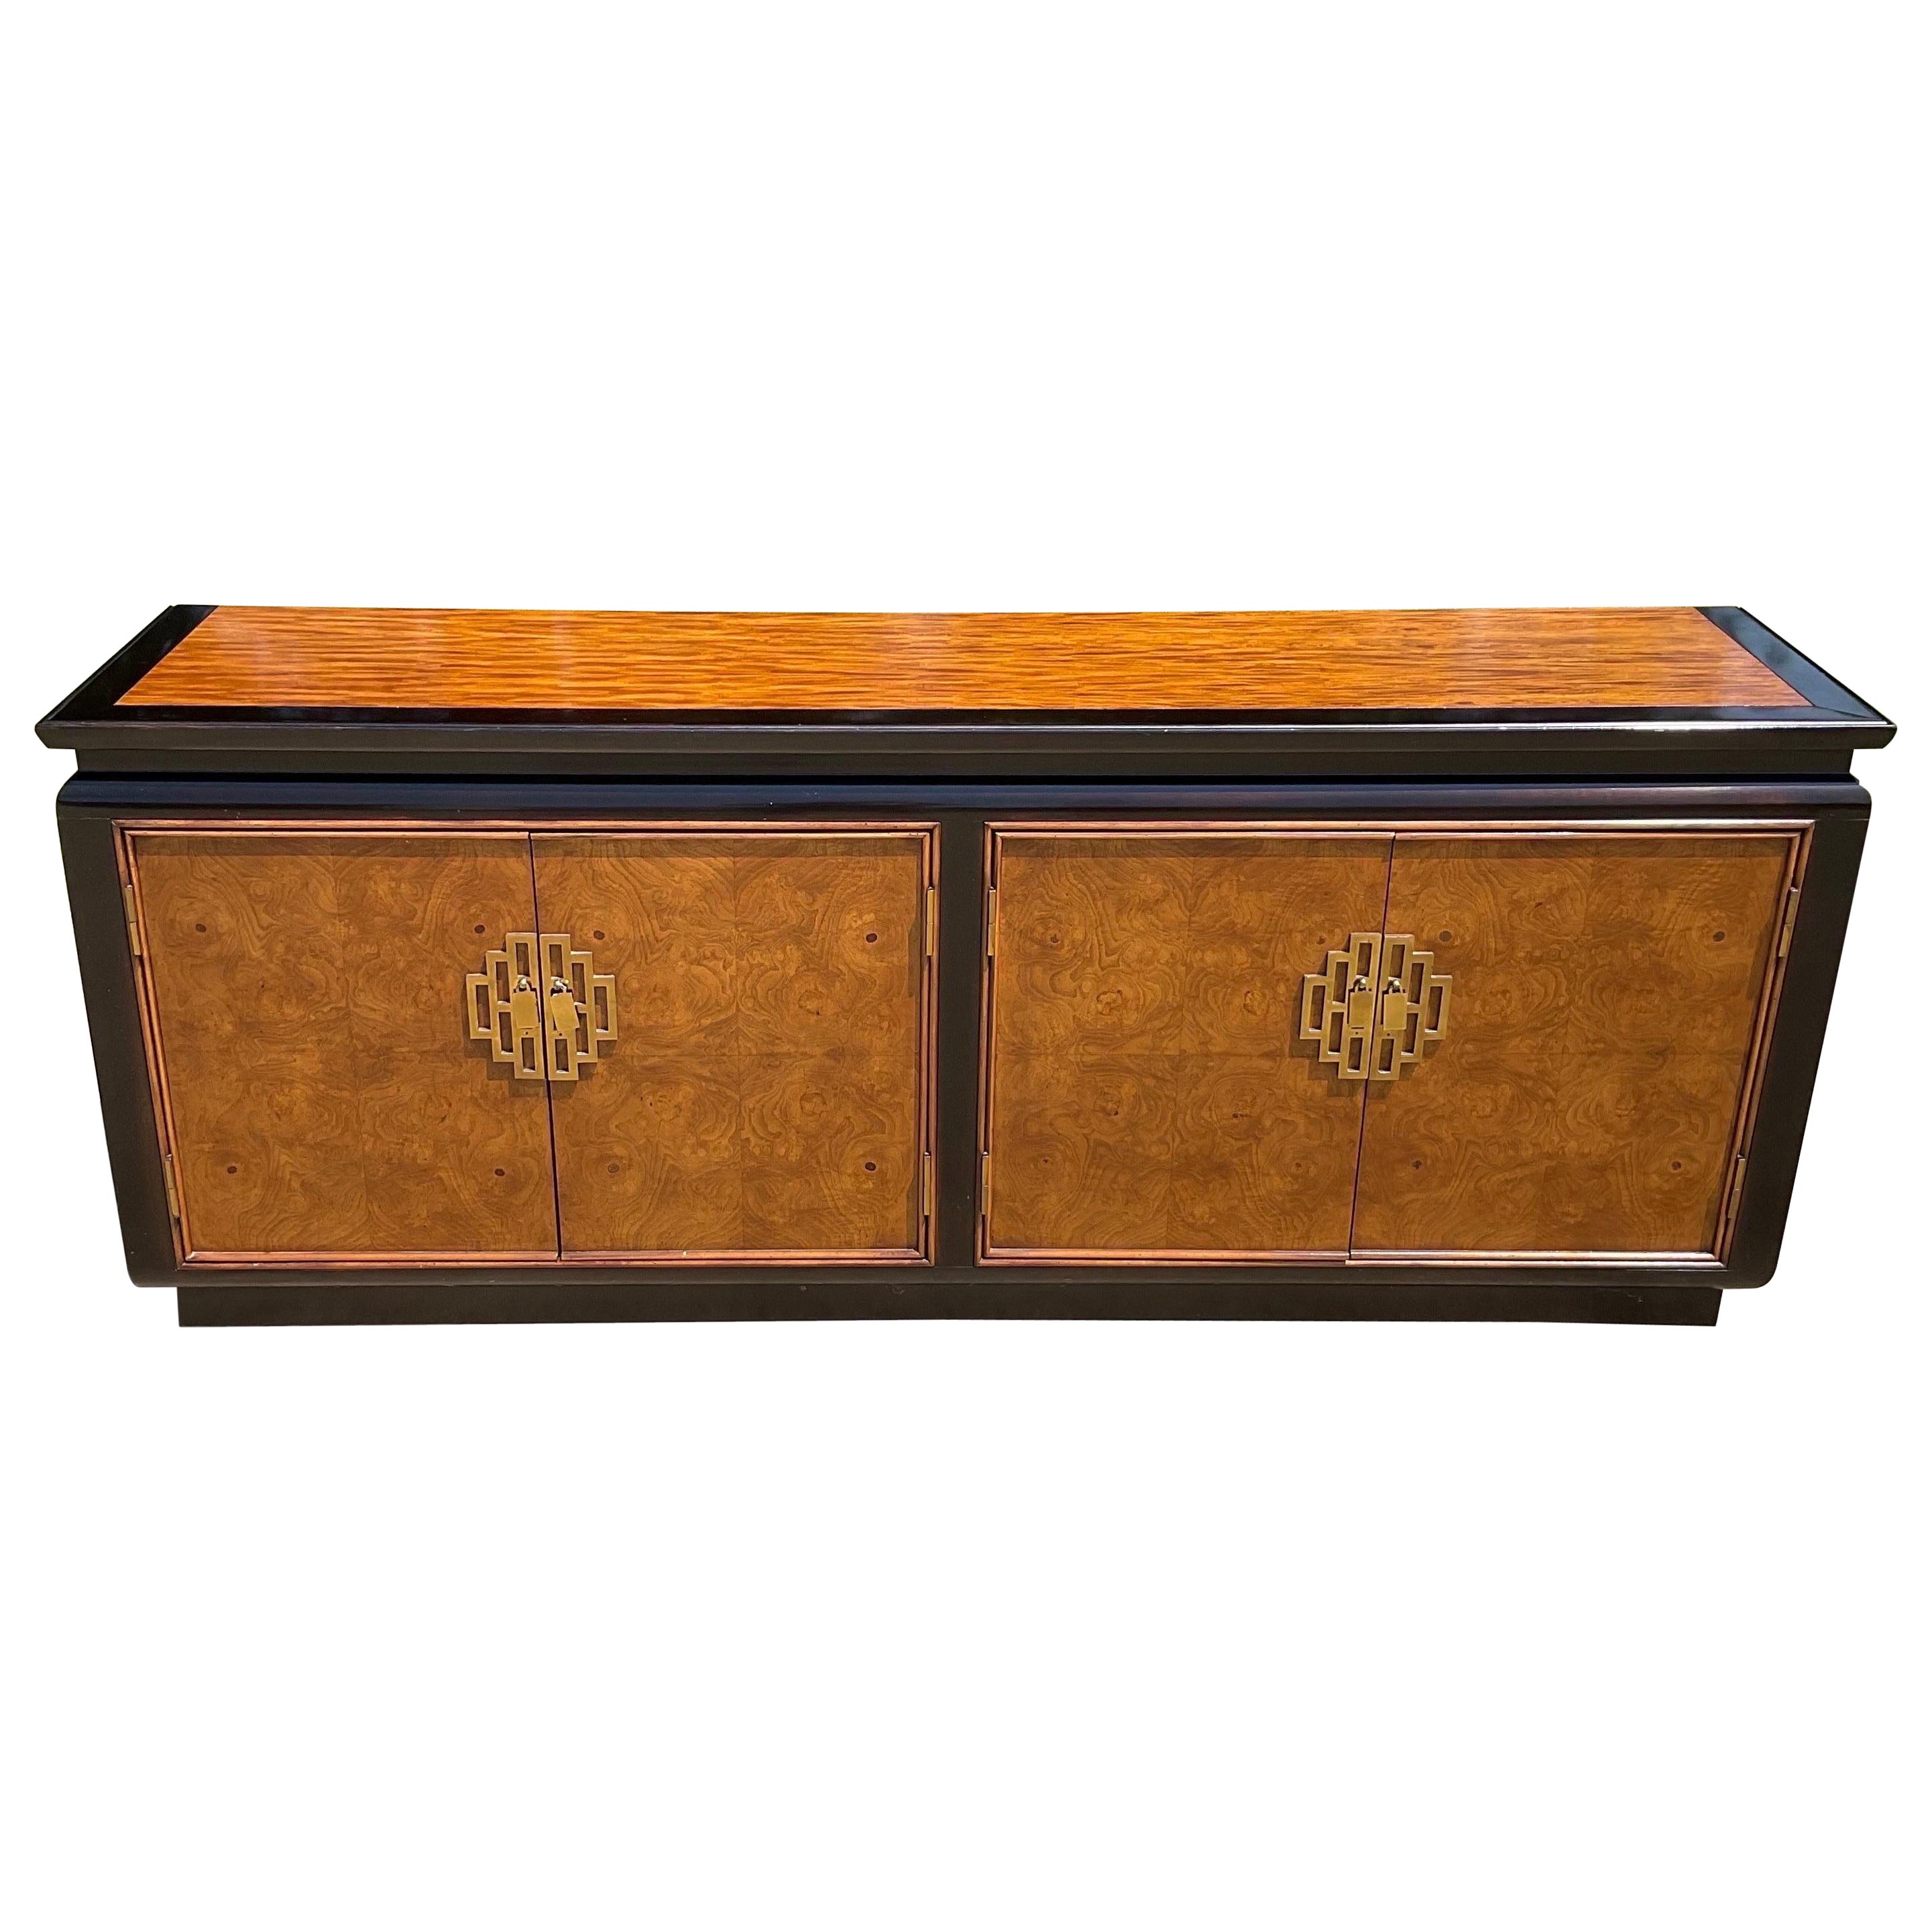 1970’s Century Furniture Sideboard From Their Chin Hua Collection by Raymond Sob